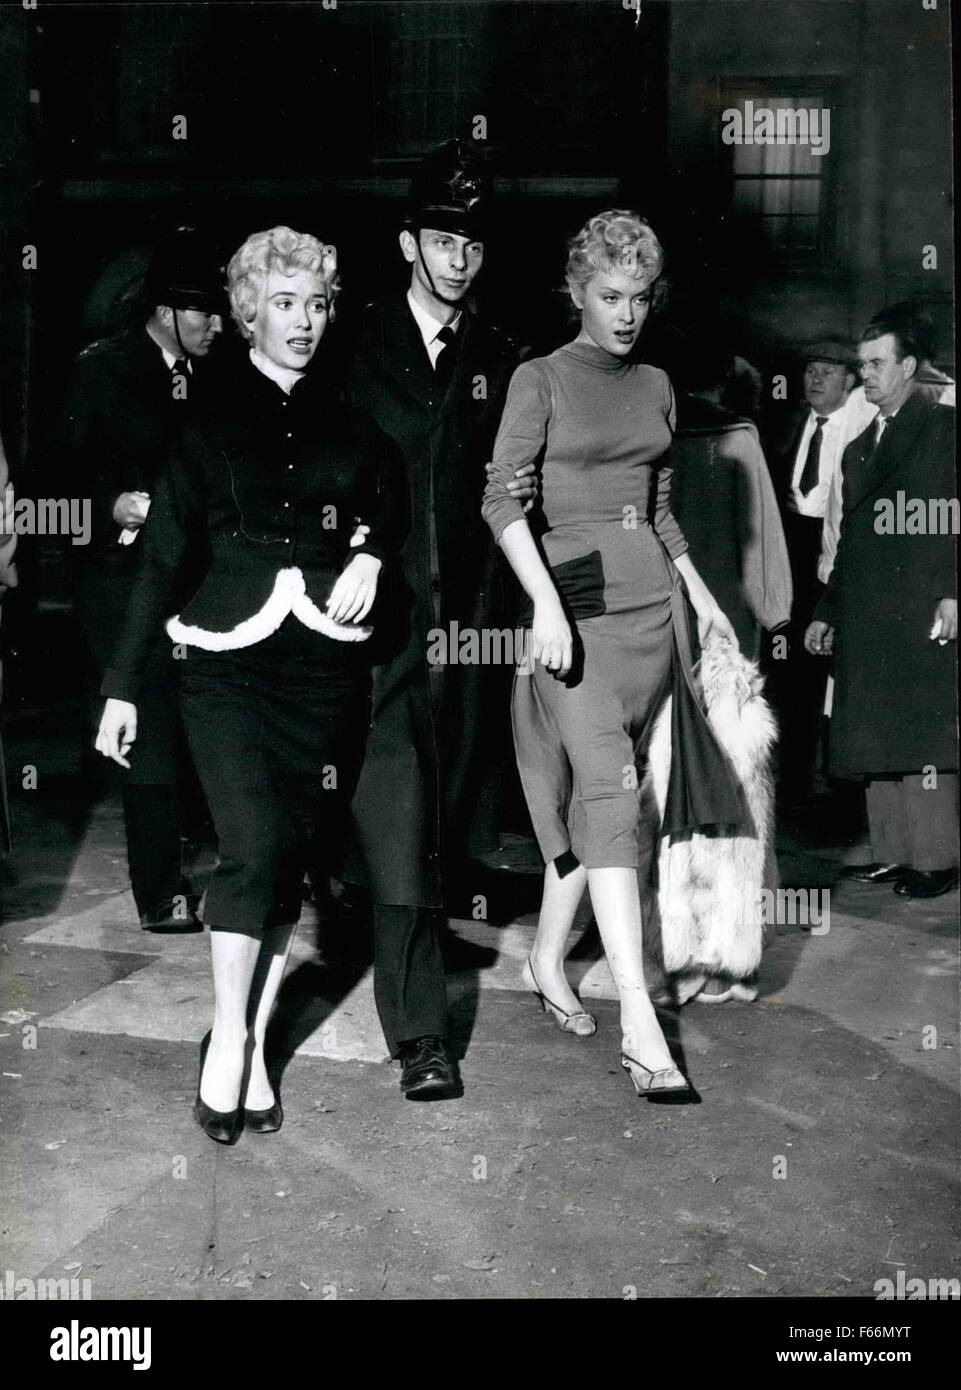 1955 - Vera Day (left) and Milly Vital are take to the Police station ...